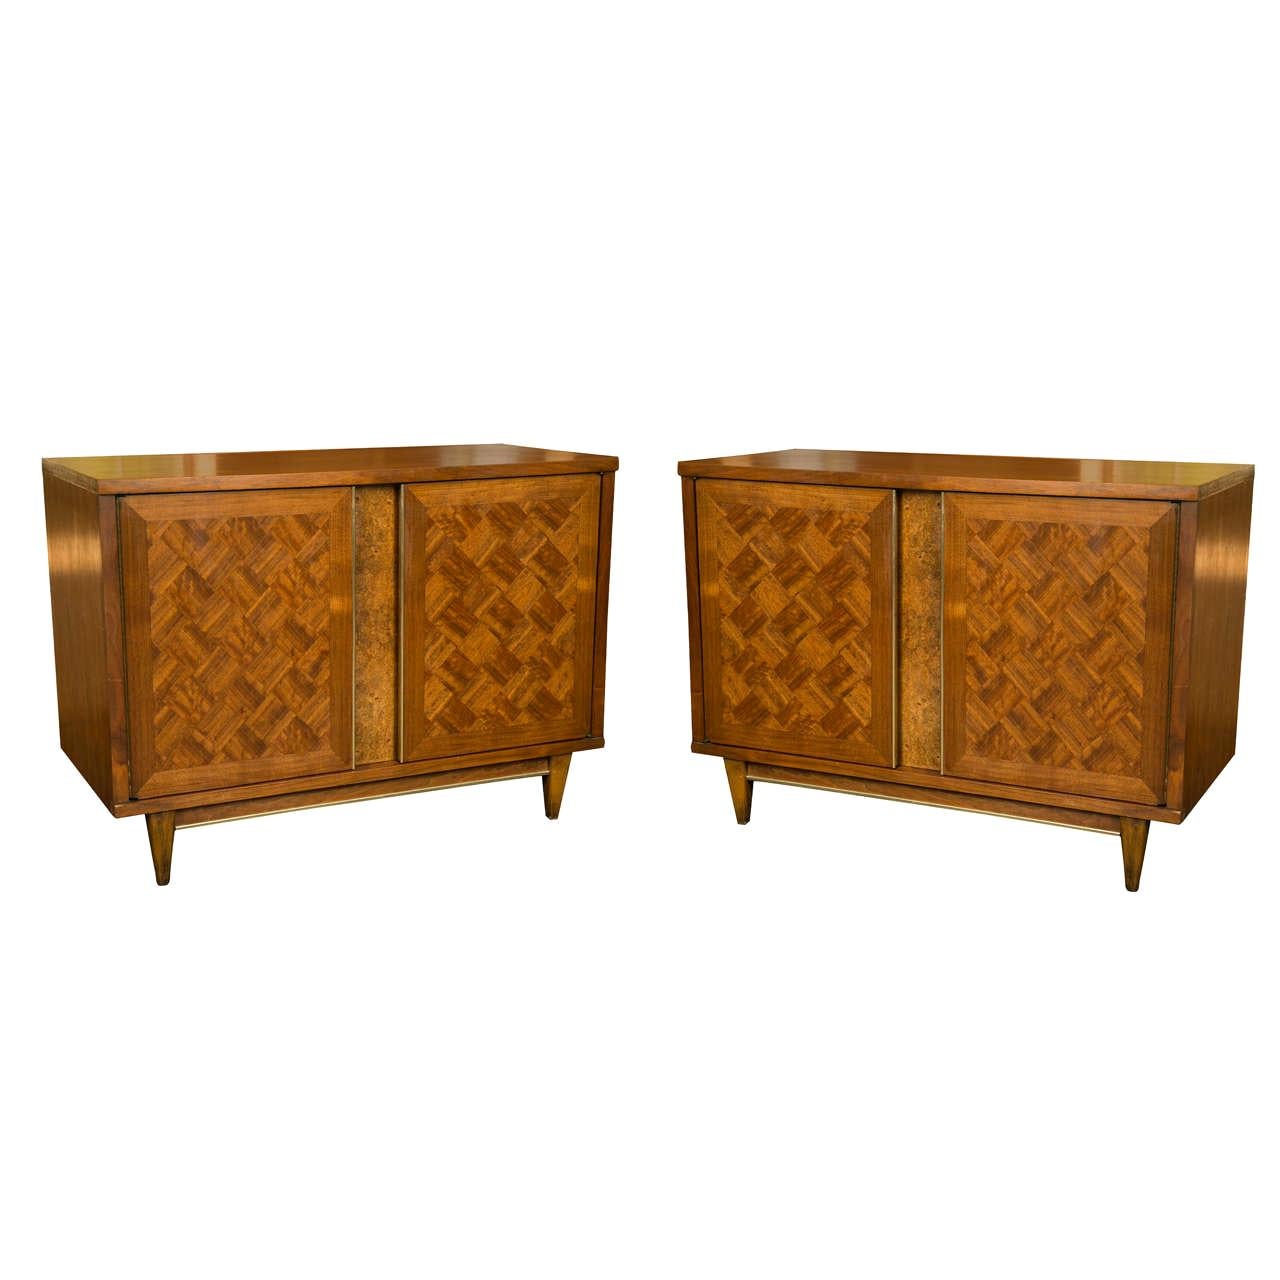 Pair of Midcentury Marquetry Wood Cabinets